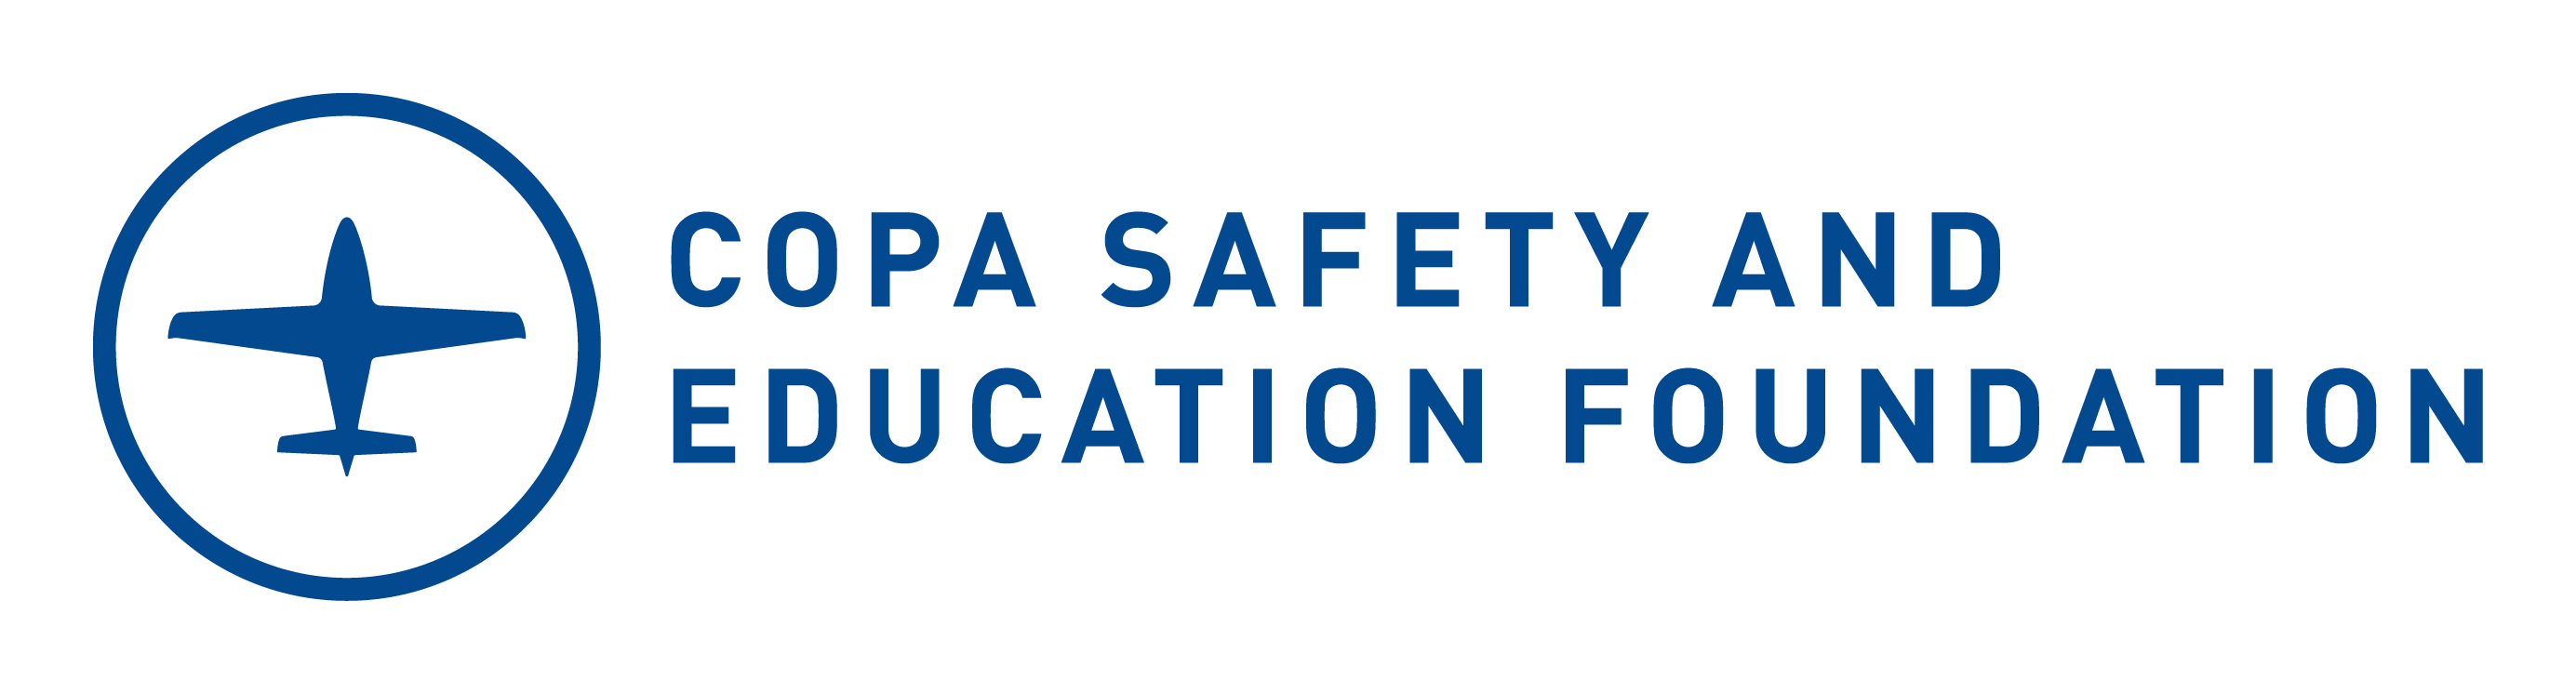 COPA Safety and Education Foundation logo